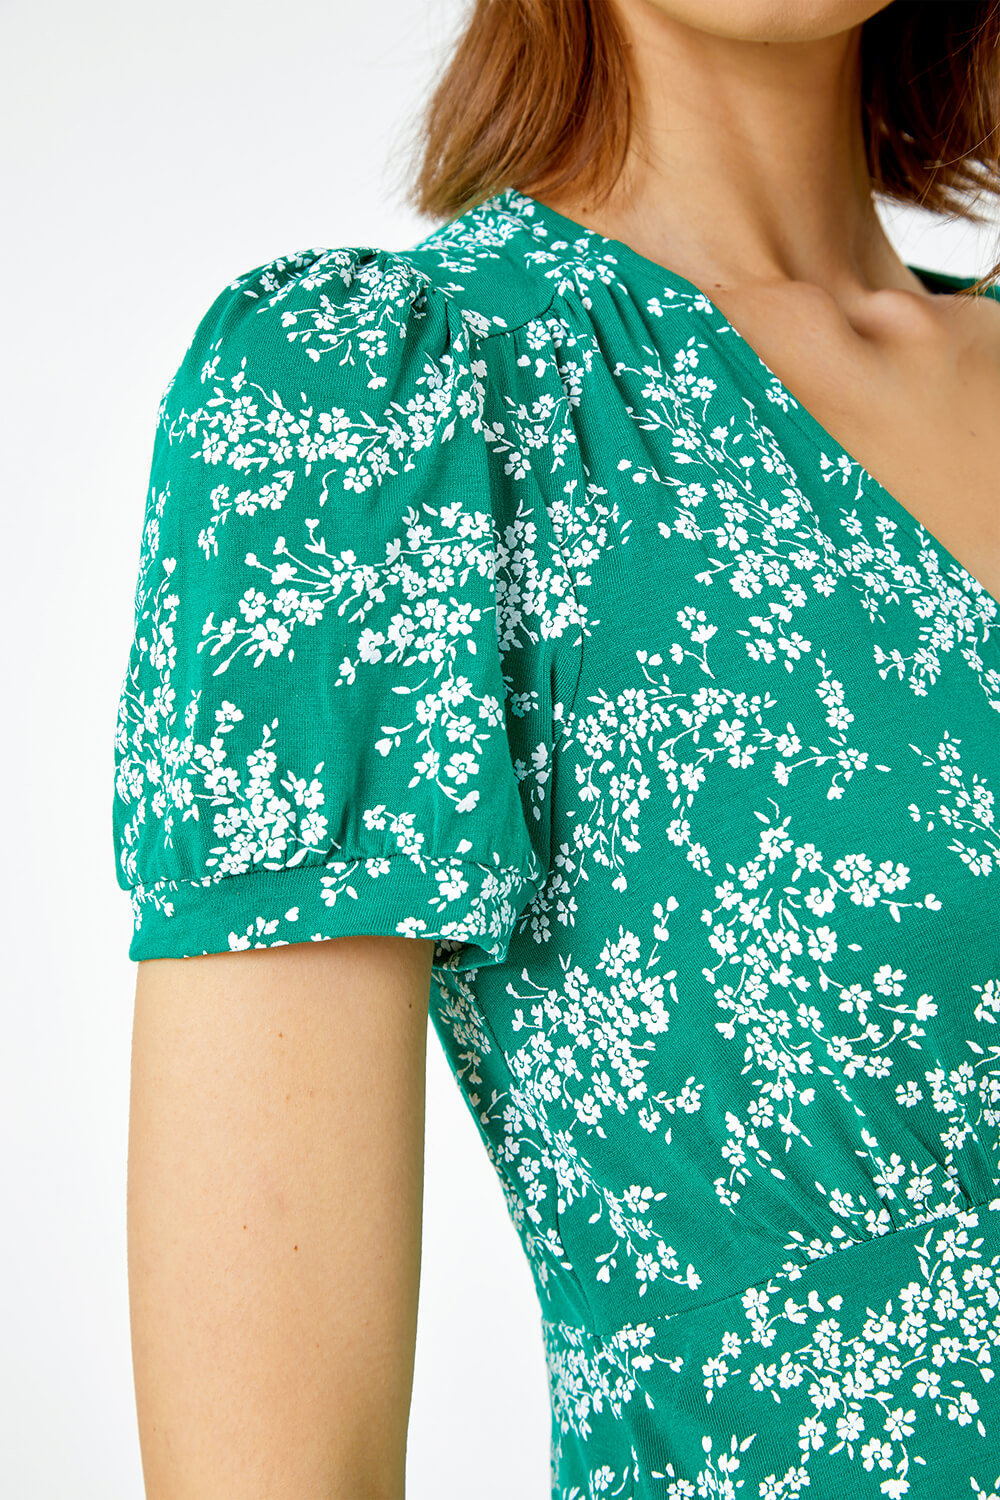 Green Ditsy Floral Print Stretch T-Shirt, Image 5 of 5